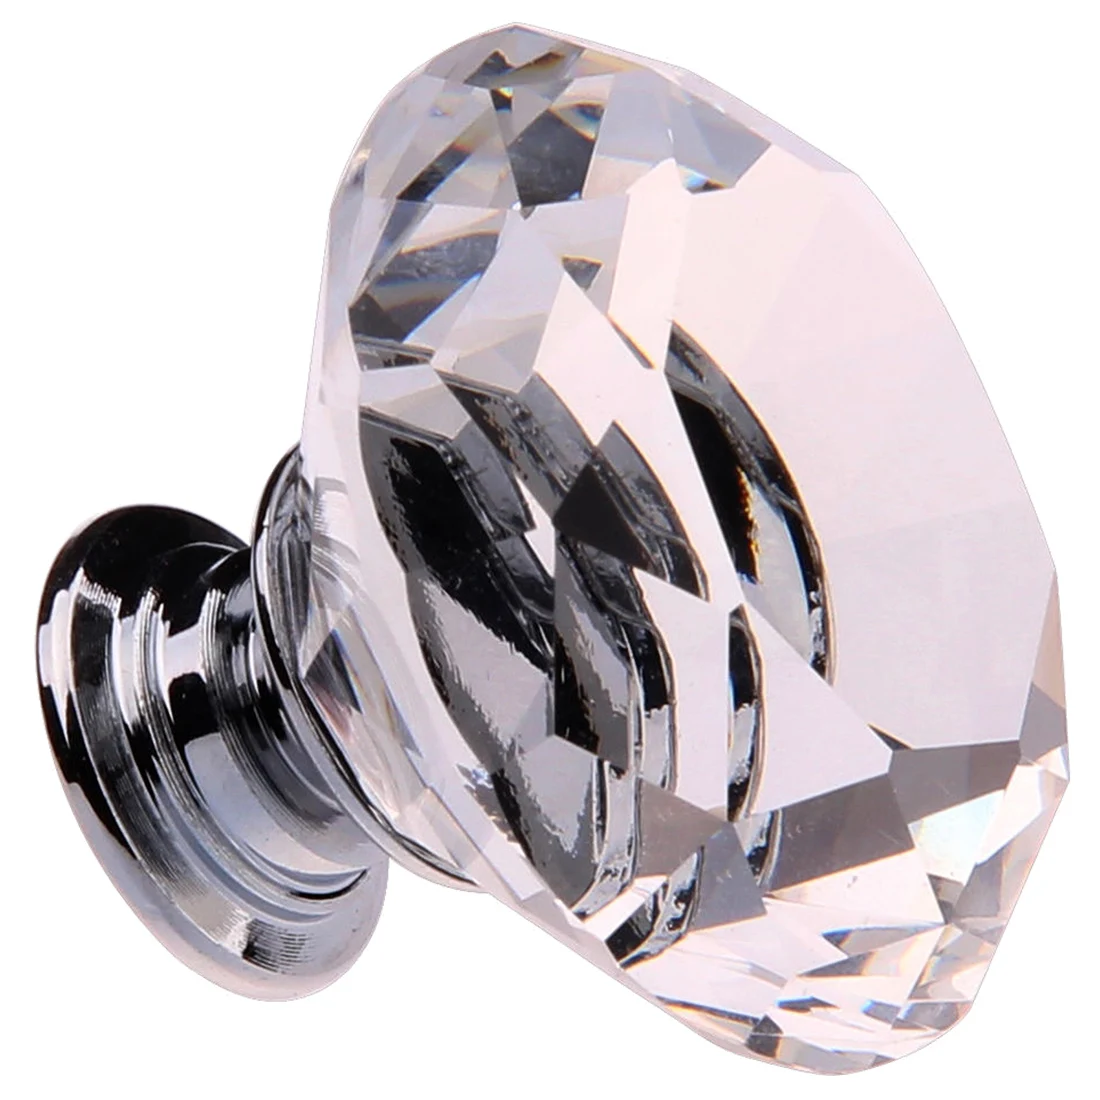 Image 8X 40MM Clear Crystal Glass Door Knobs Handles Diamond Drawer Cabinet Furniture